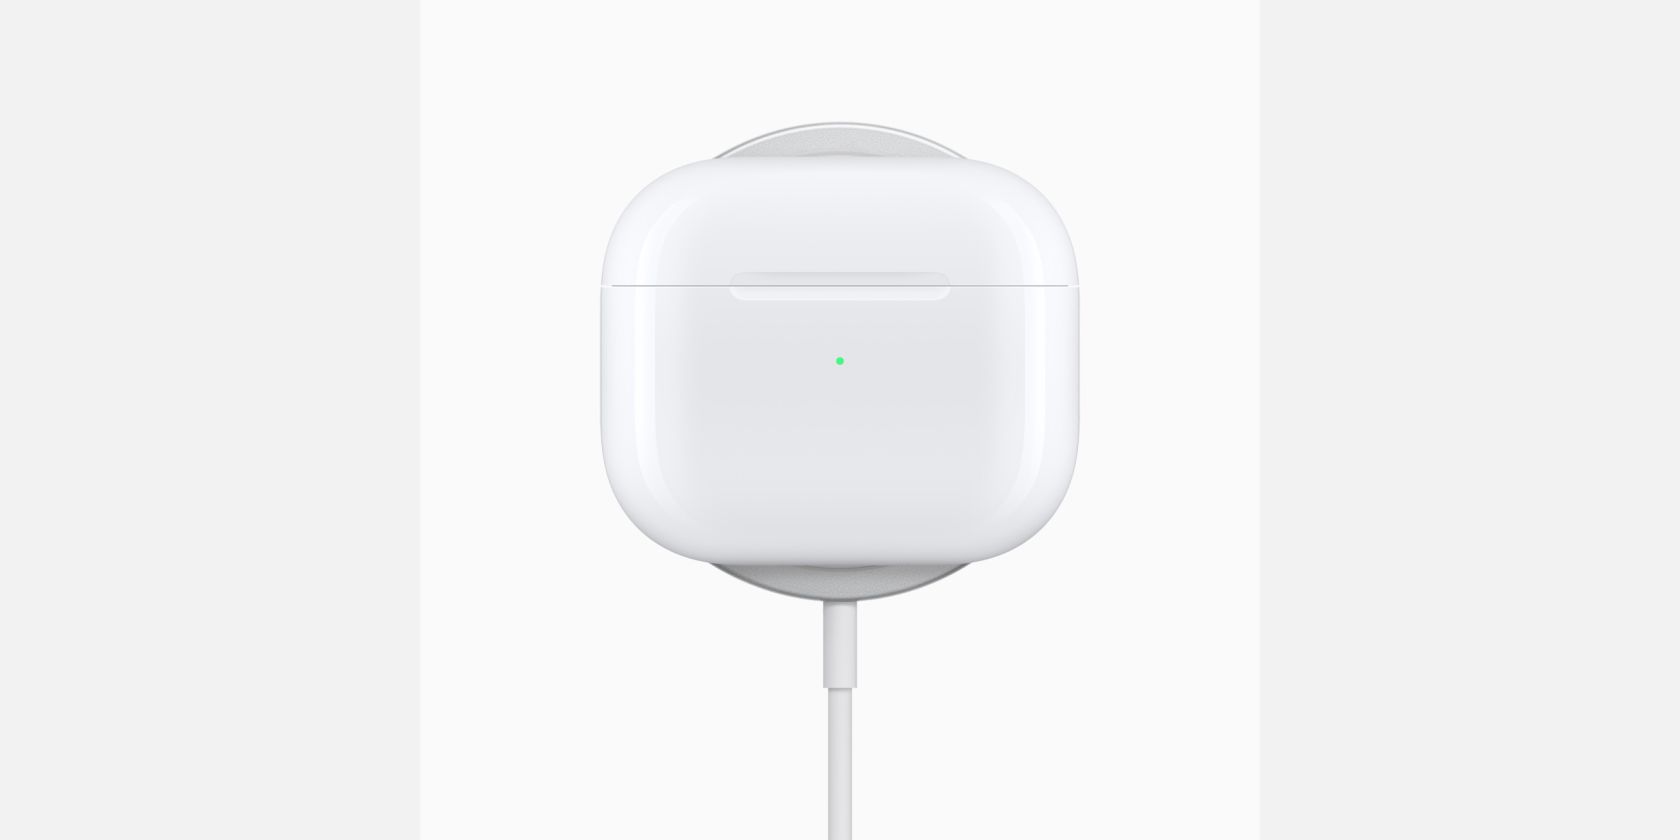 AirPods 3rd Generation with MagSafe charging